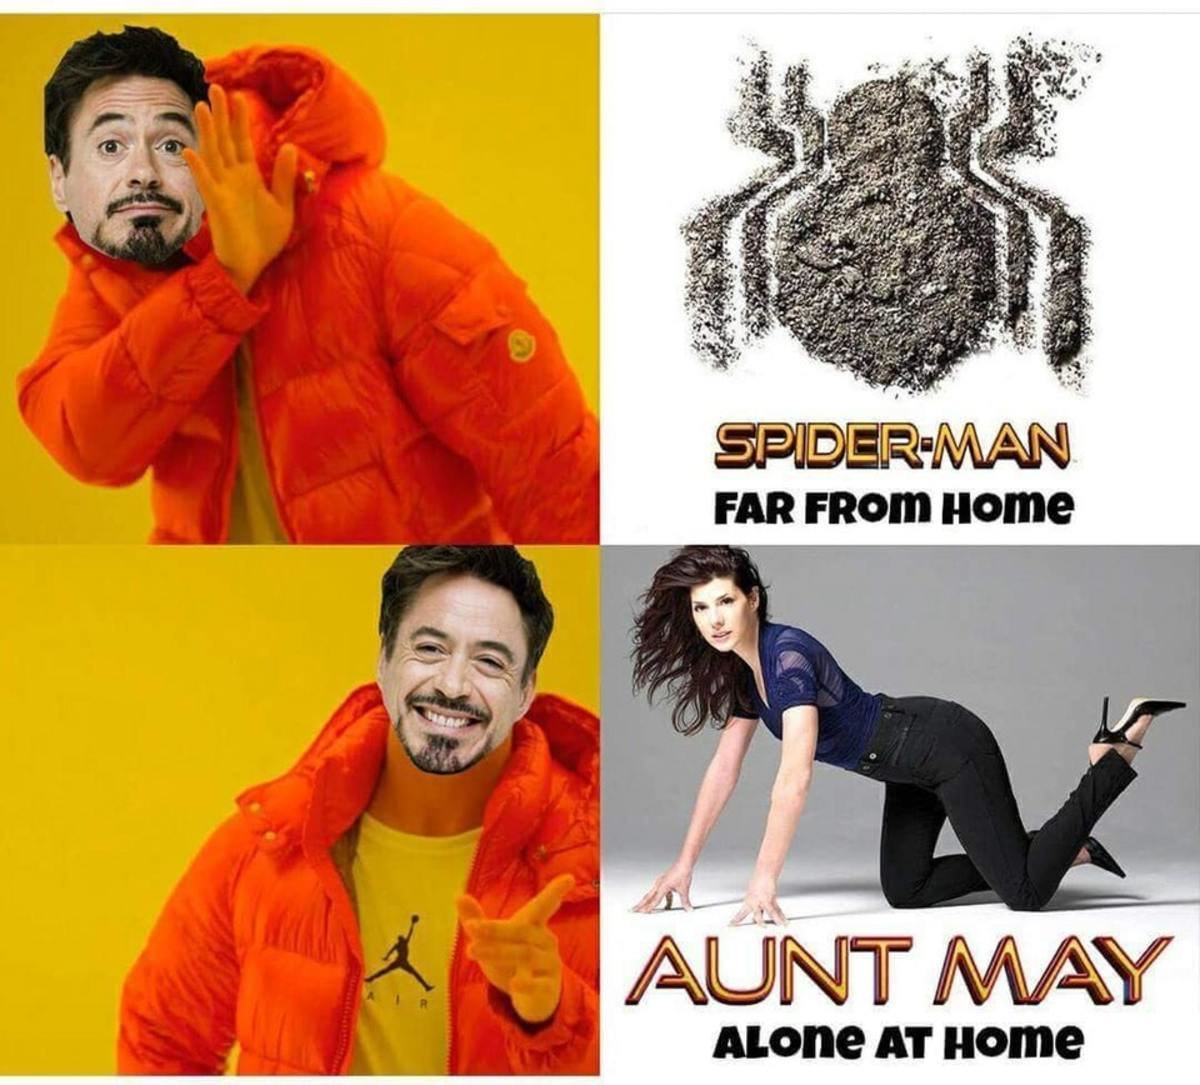 memes - spider man far from home meme - SpiderMan Far From Home Aunt May ALOne At Home